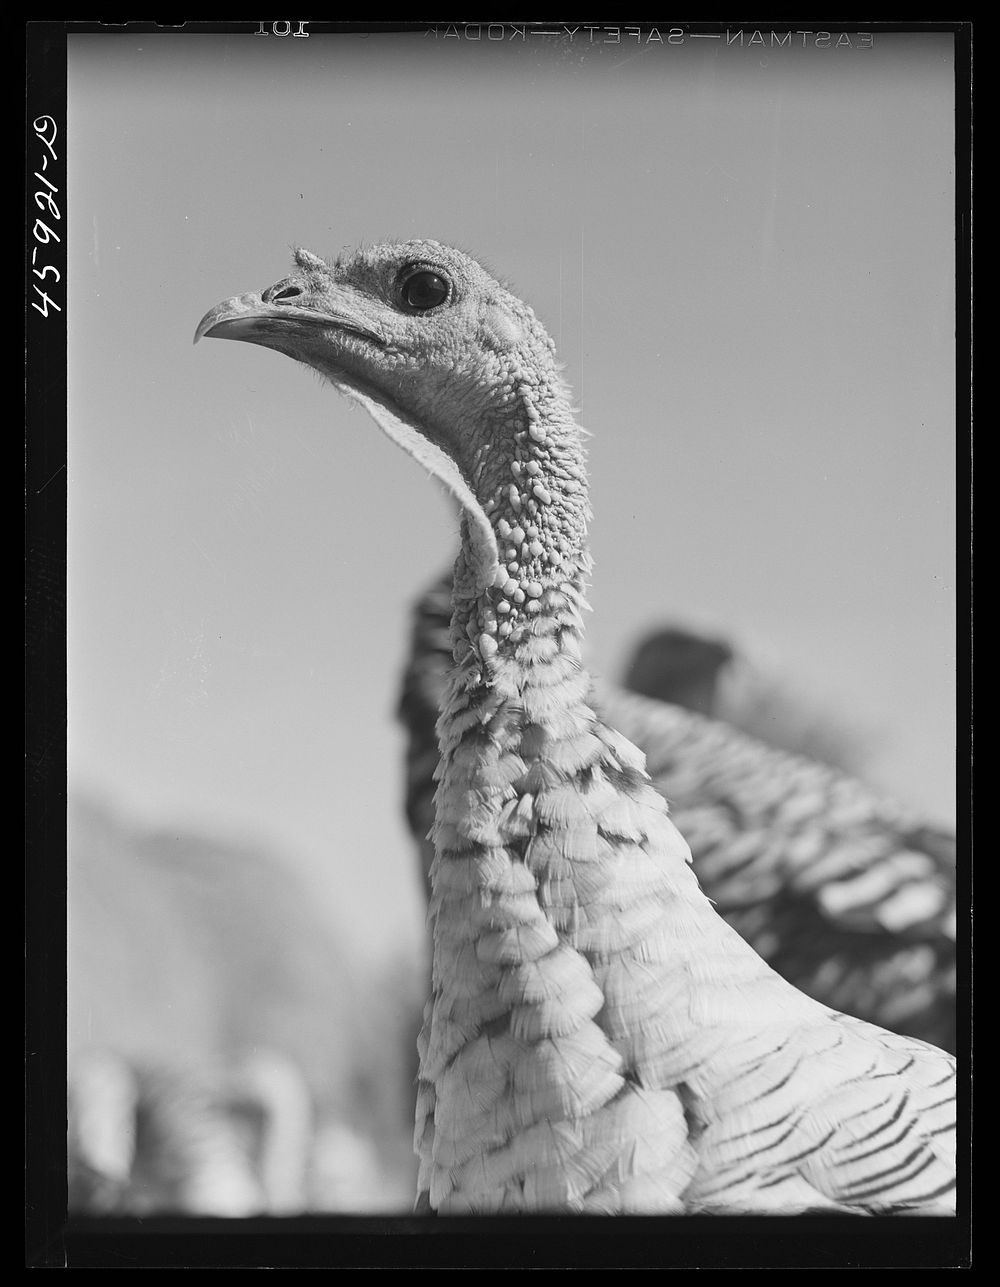 Turkey on a farm near Enosburg Falls, Vermont. Sourced from the Library of Congress.